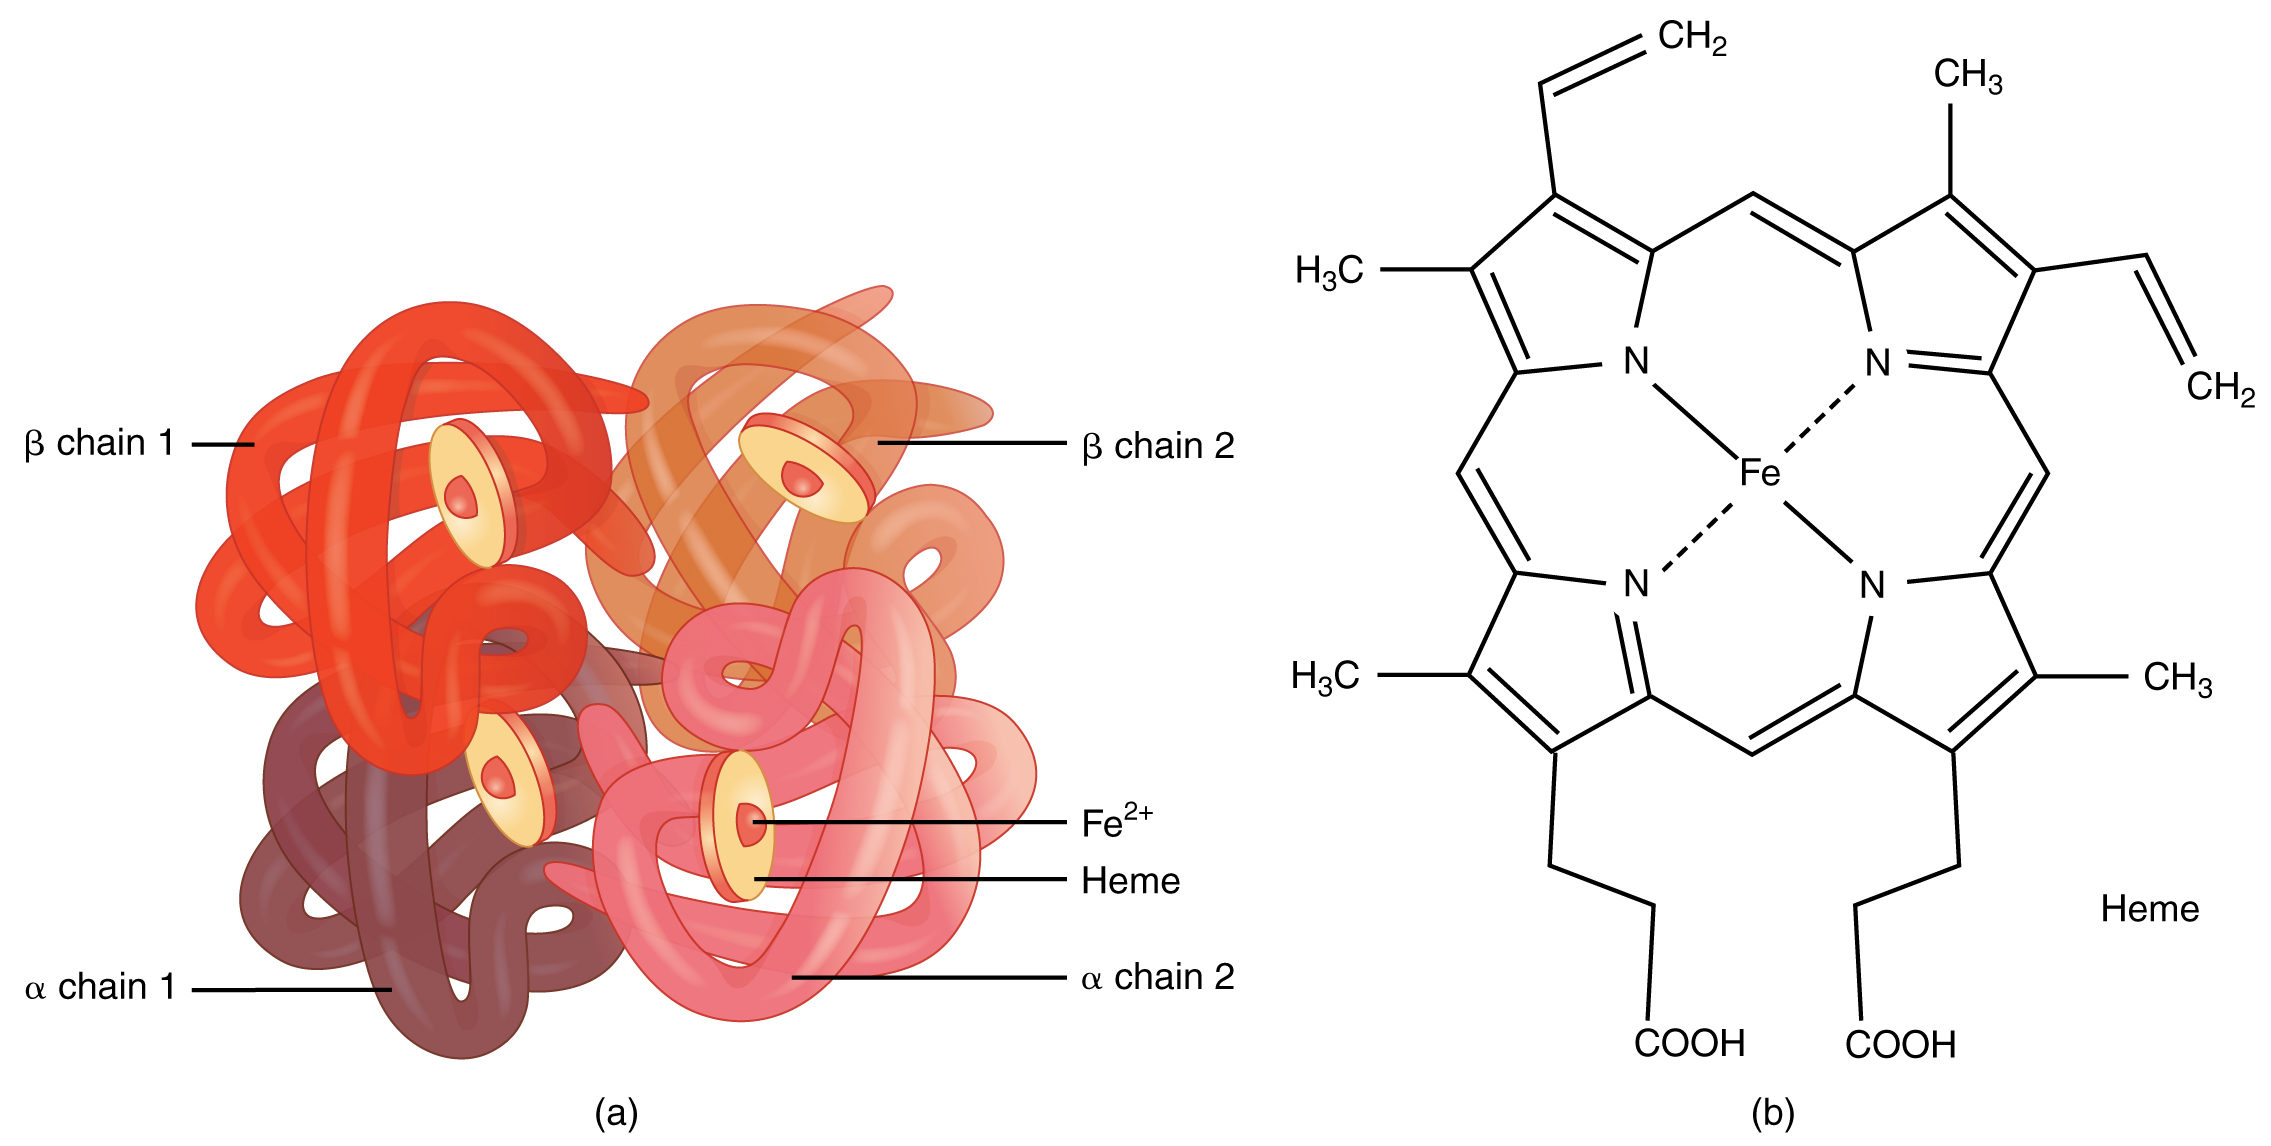 This figure shows the structure of hemoglobin. The left panel shows the protein structure and the right panel shows the chemical formula.